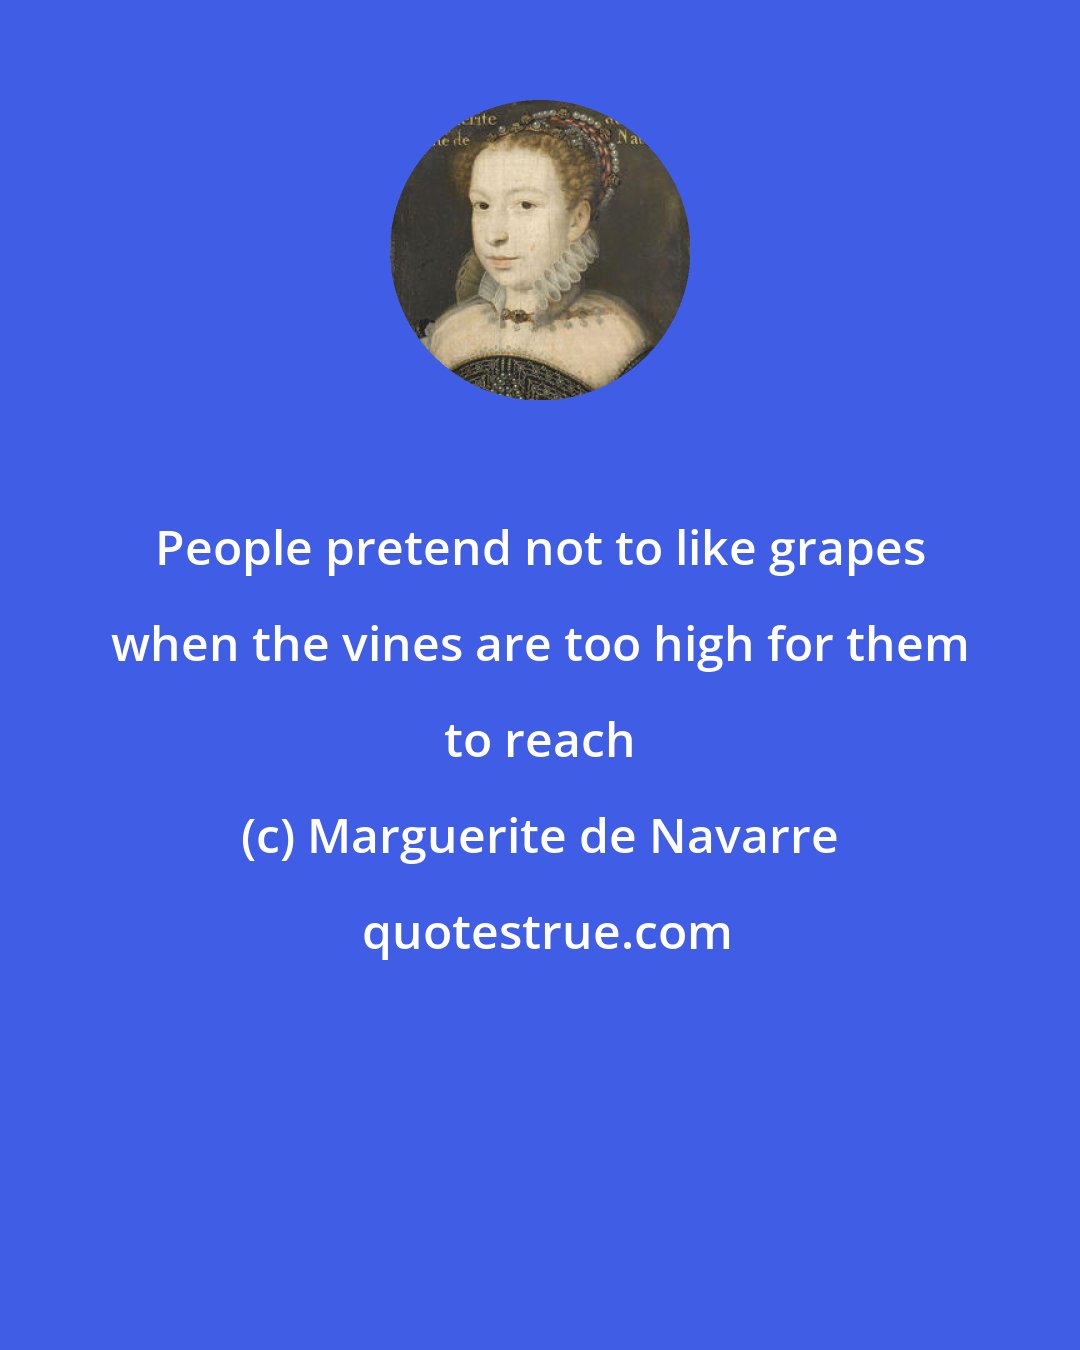 Marguerite de Navarre: People pretend not to like grapes when the vines are too high for them to reach